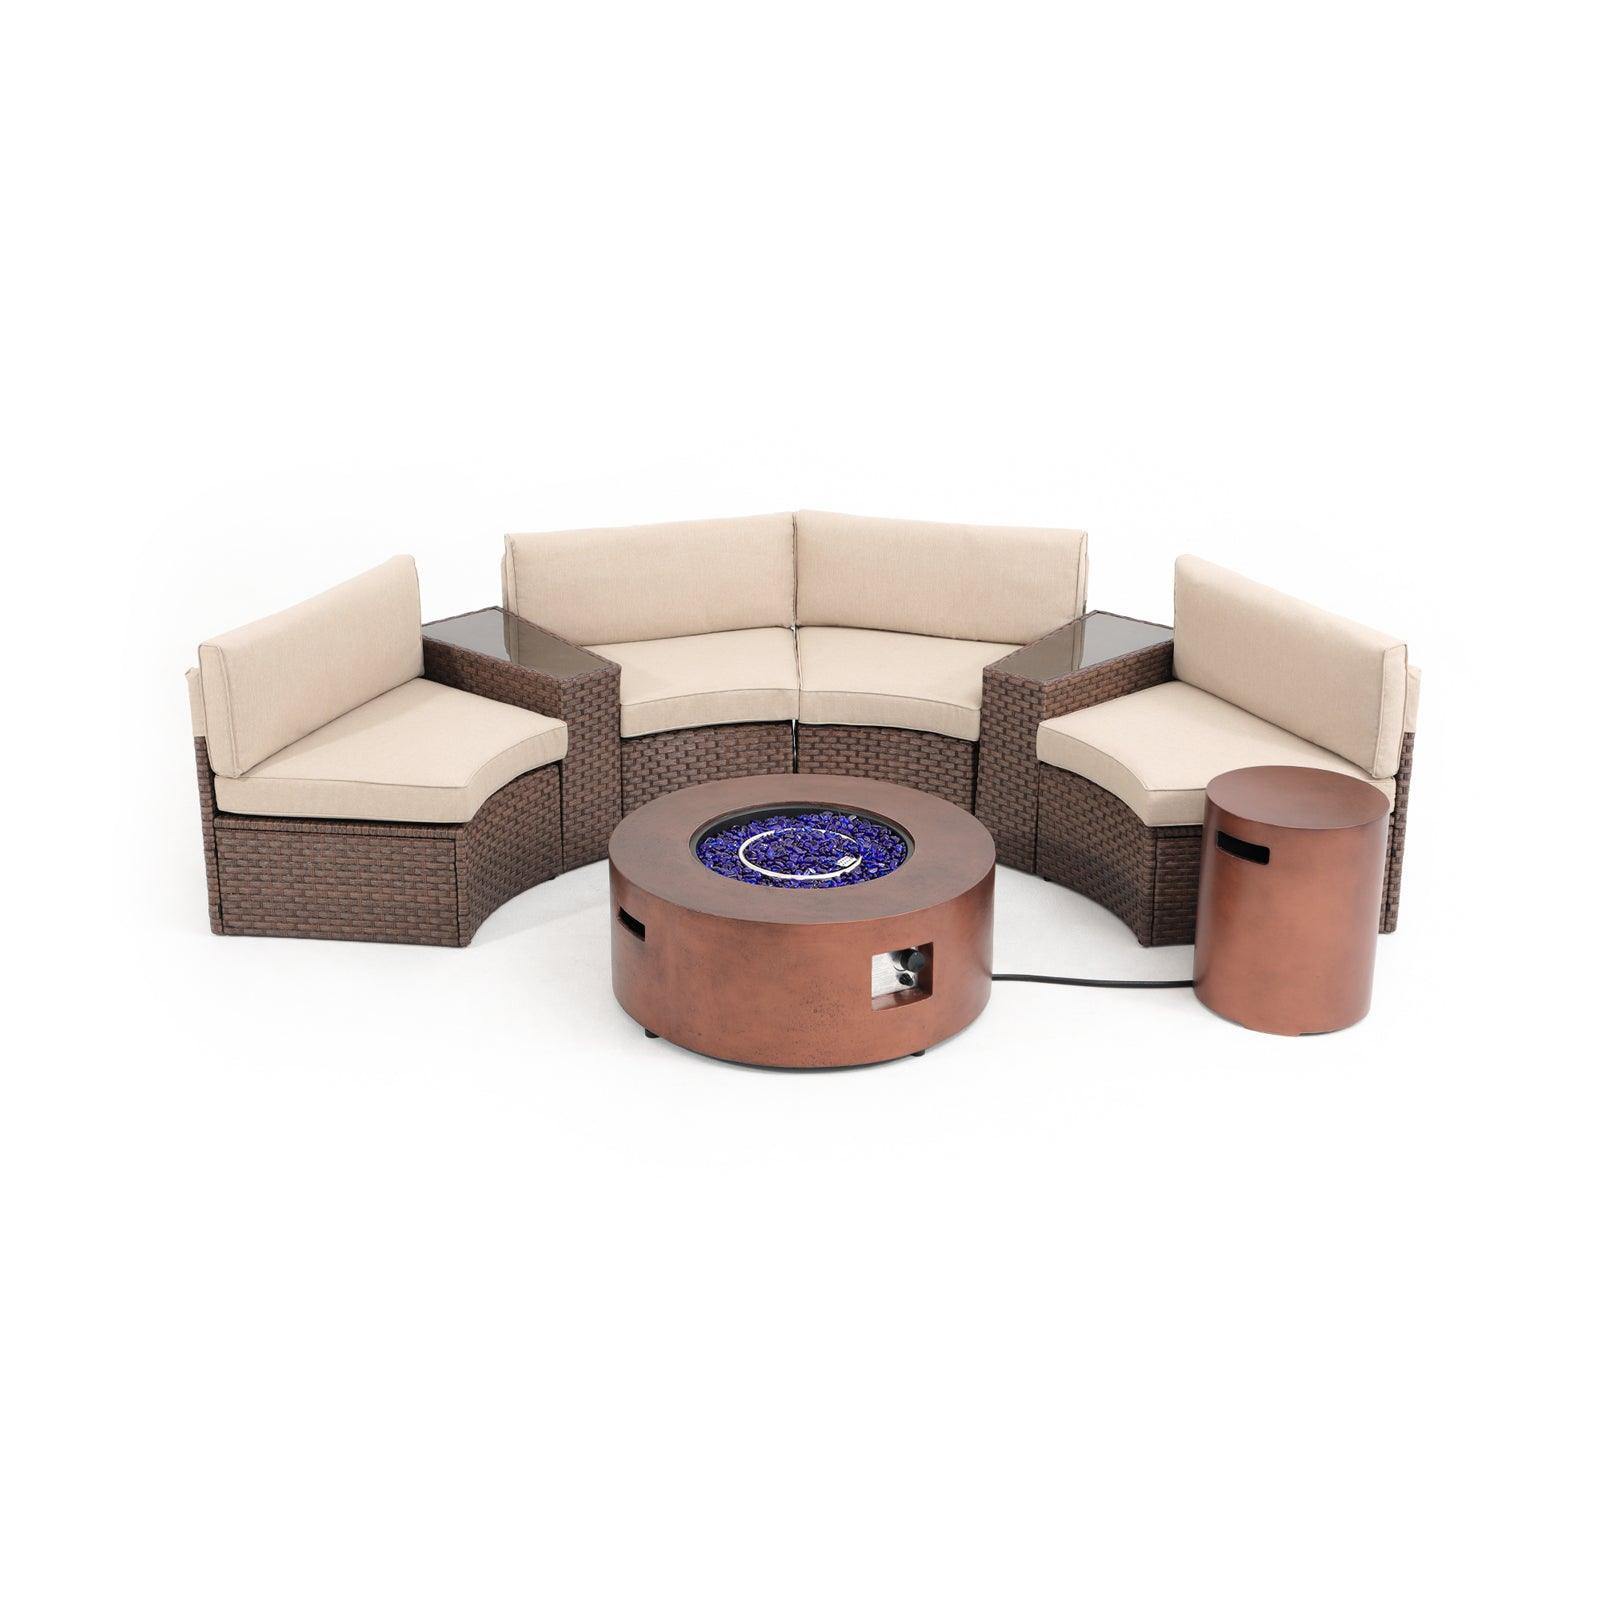 Boboli 4-seater brown Wicker Curved Sectional sofas with beige cushions + 2 side tables + 1 brown Propane Fire Pit with tank holder, front view - Jardina Furniture #color_Brown #piece_7-pc.